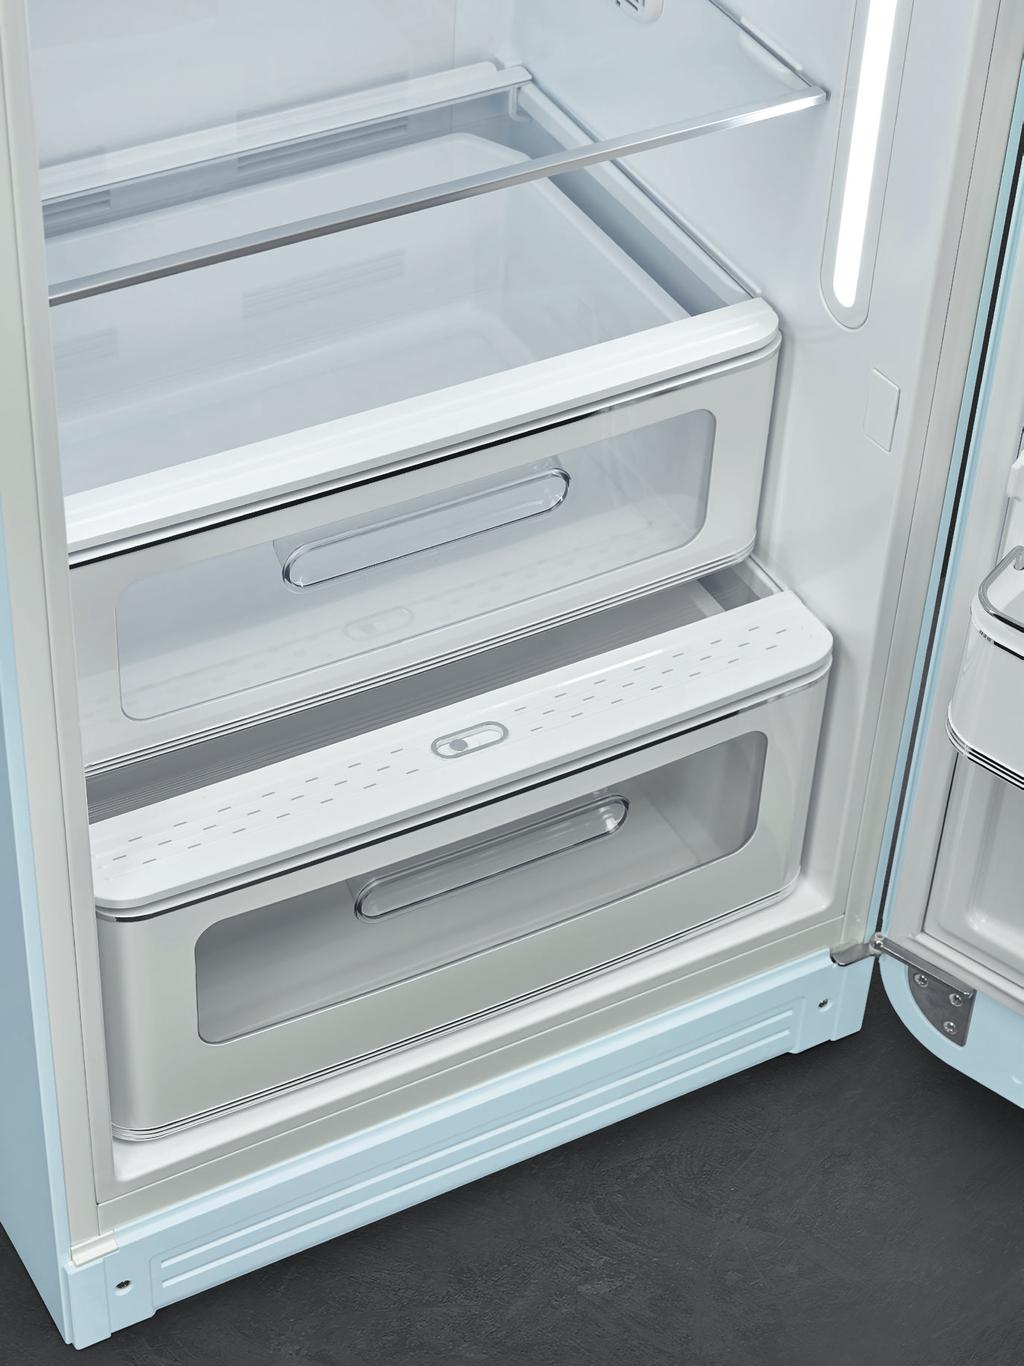 FAB28 LIFE PLUS DRAWER This is a special zone with a temperature range of -2 - +3 C, lower than the set temperature, and ideal for keeping more perishable foods such as meat and fish.